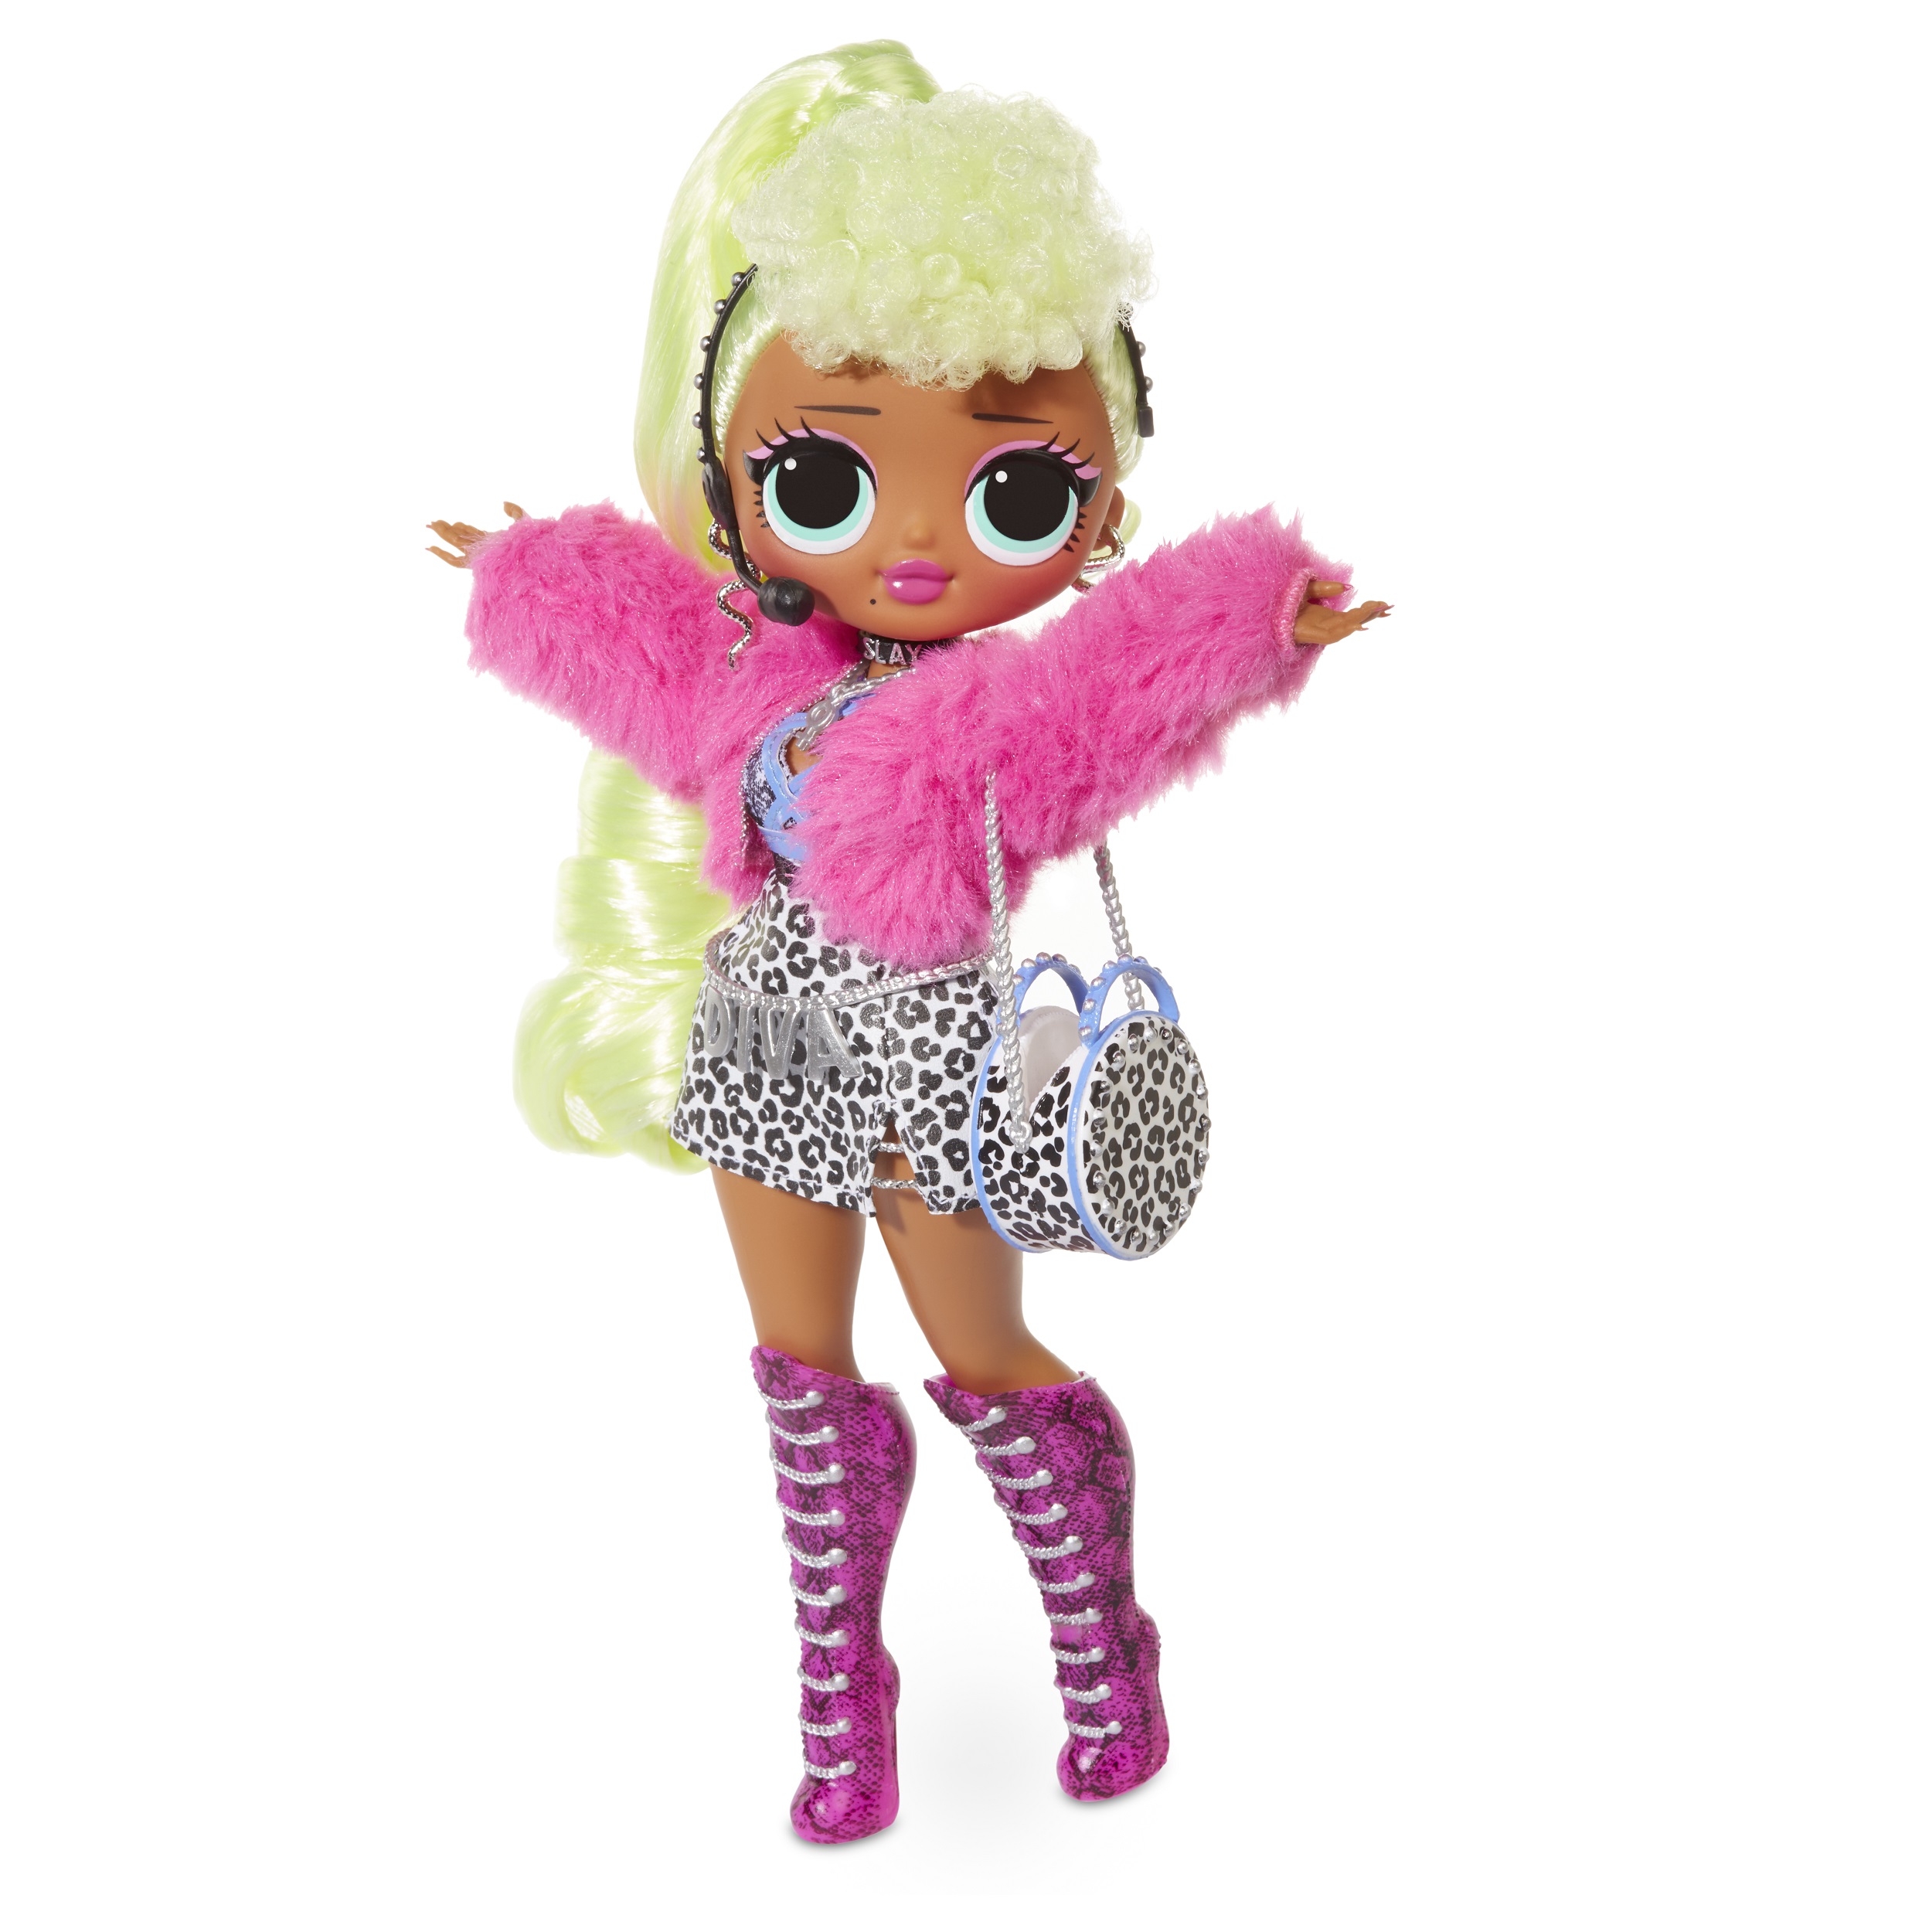 LOL Surprise OMG Lady Diva Fashion Doll With 20 Surprises, Great Gift for Kids Ages 4 5 6+ - image 1 of 6